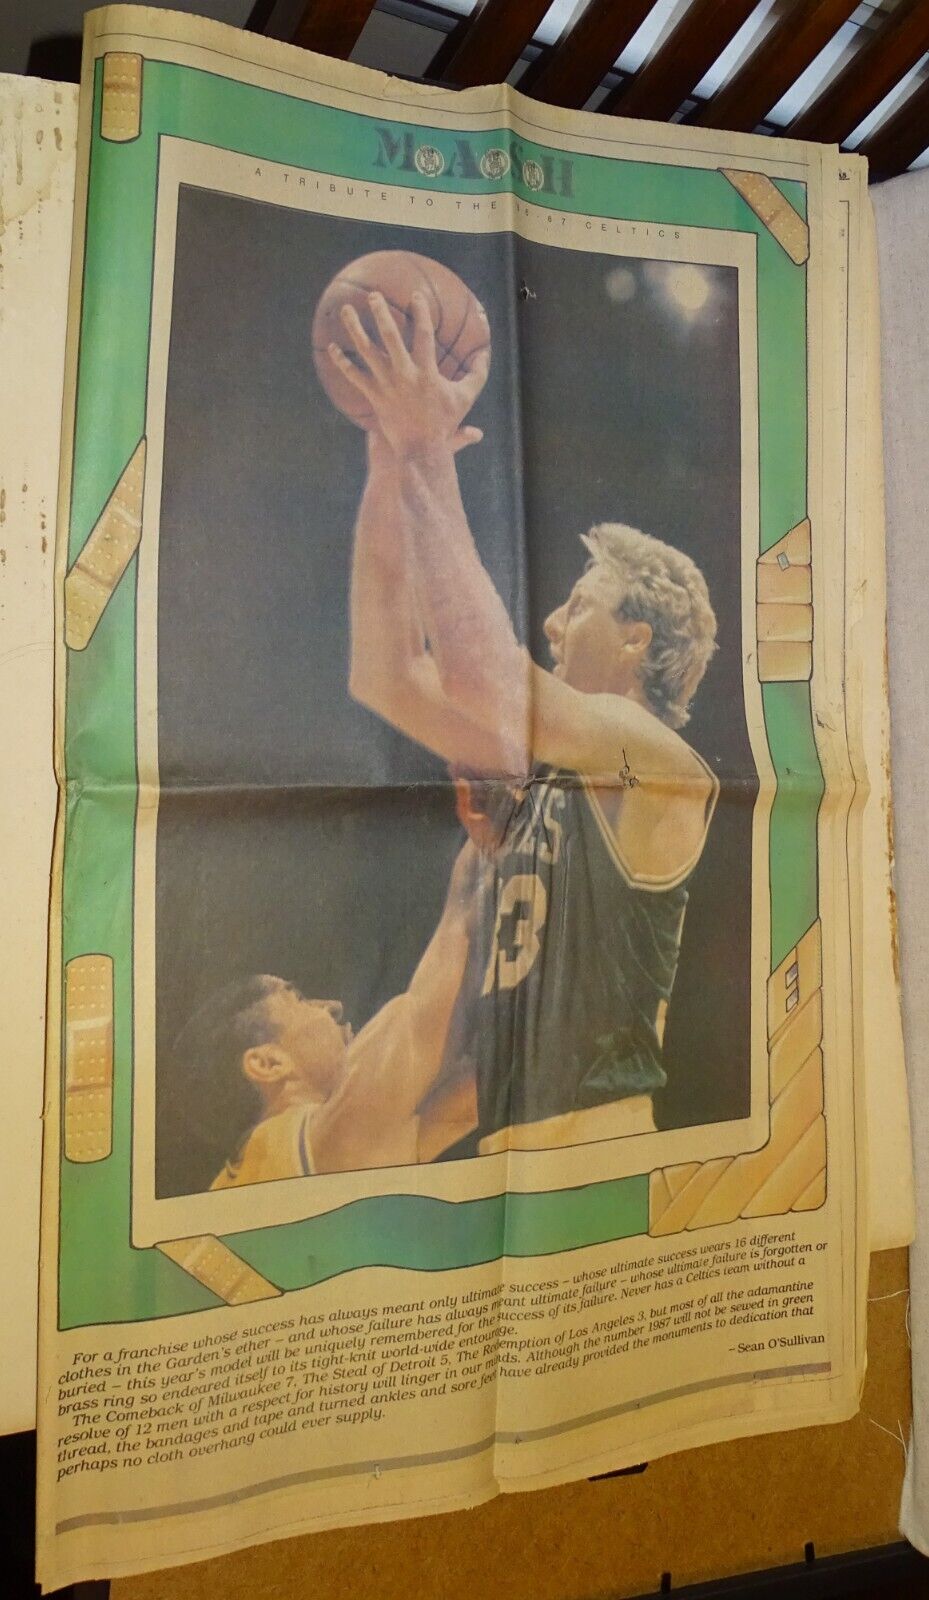 TRIBUTE TO THE 1986-1987 CELTICS 6/16/87 Boston Globe Newspaper Section (poor)